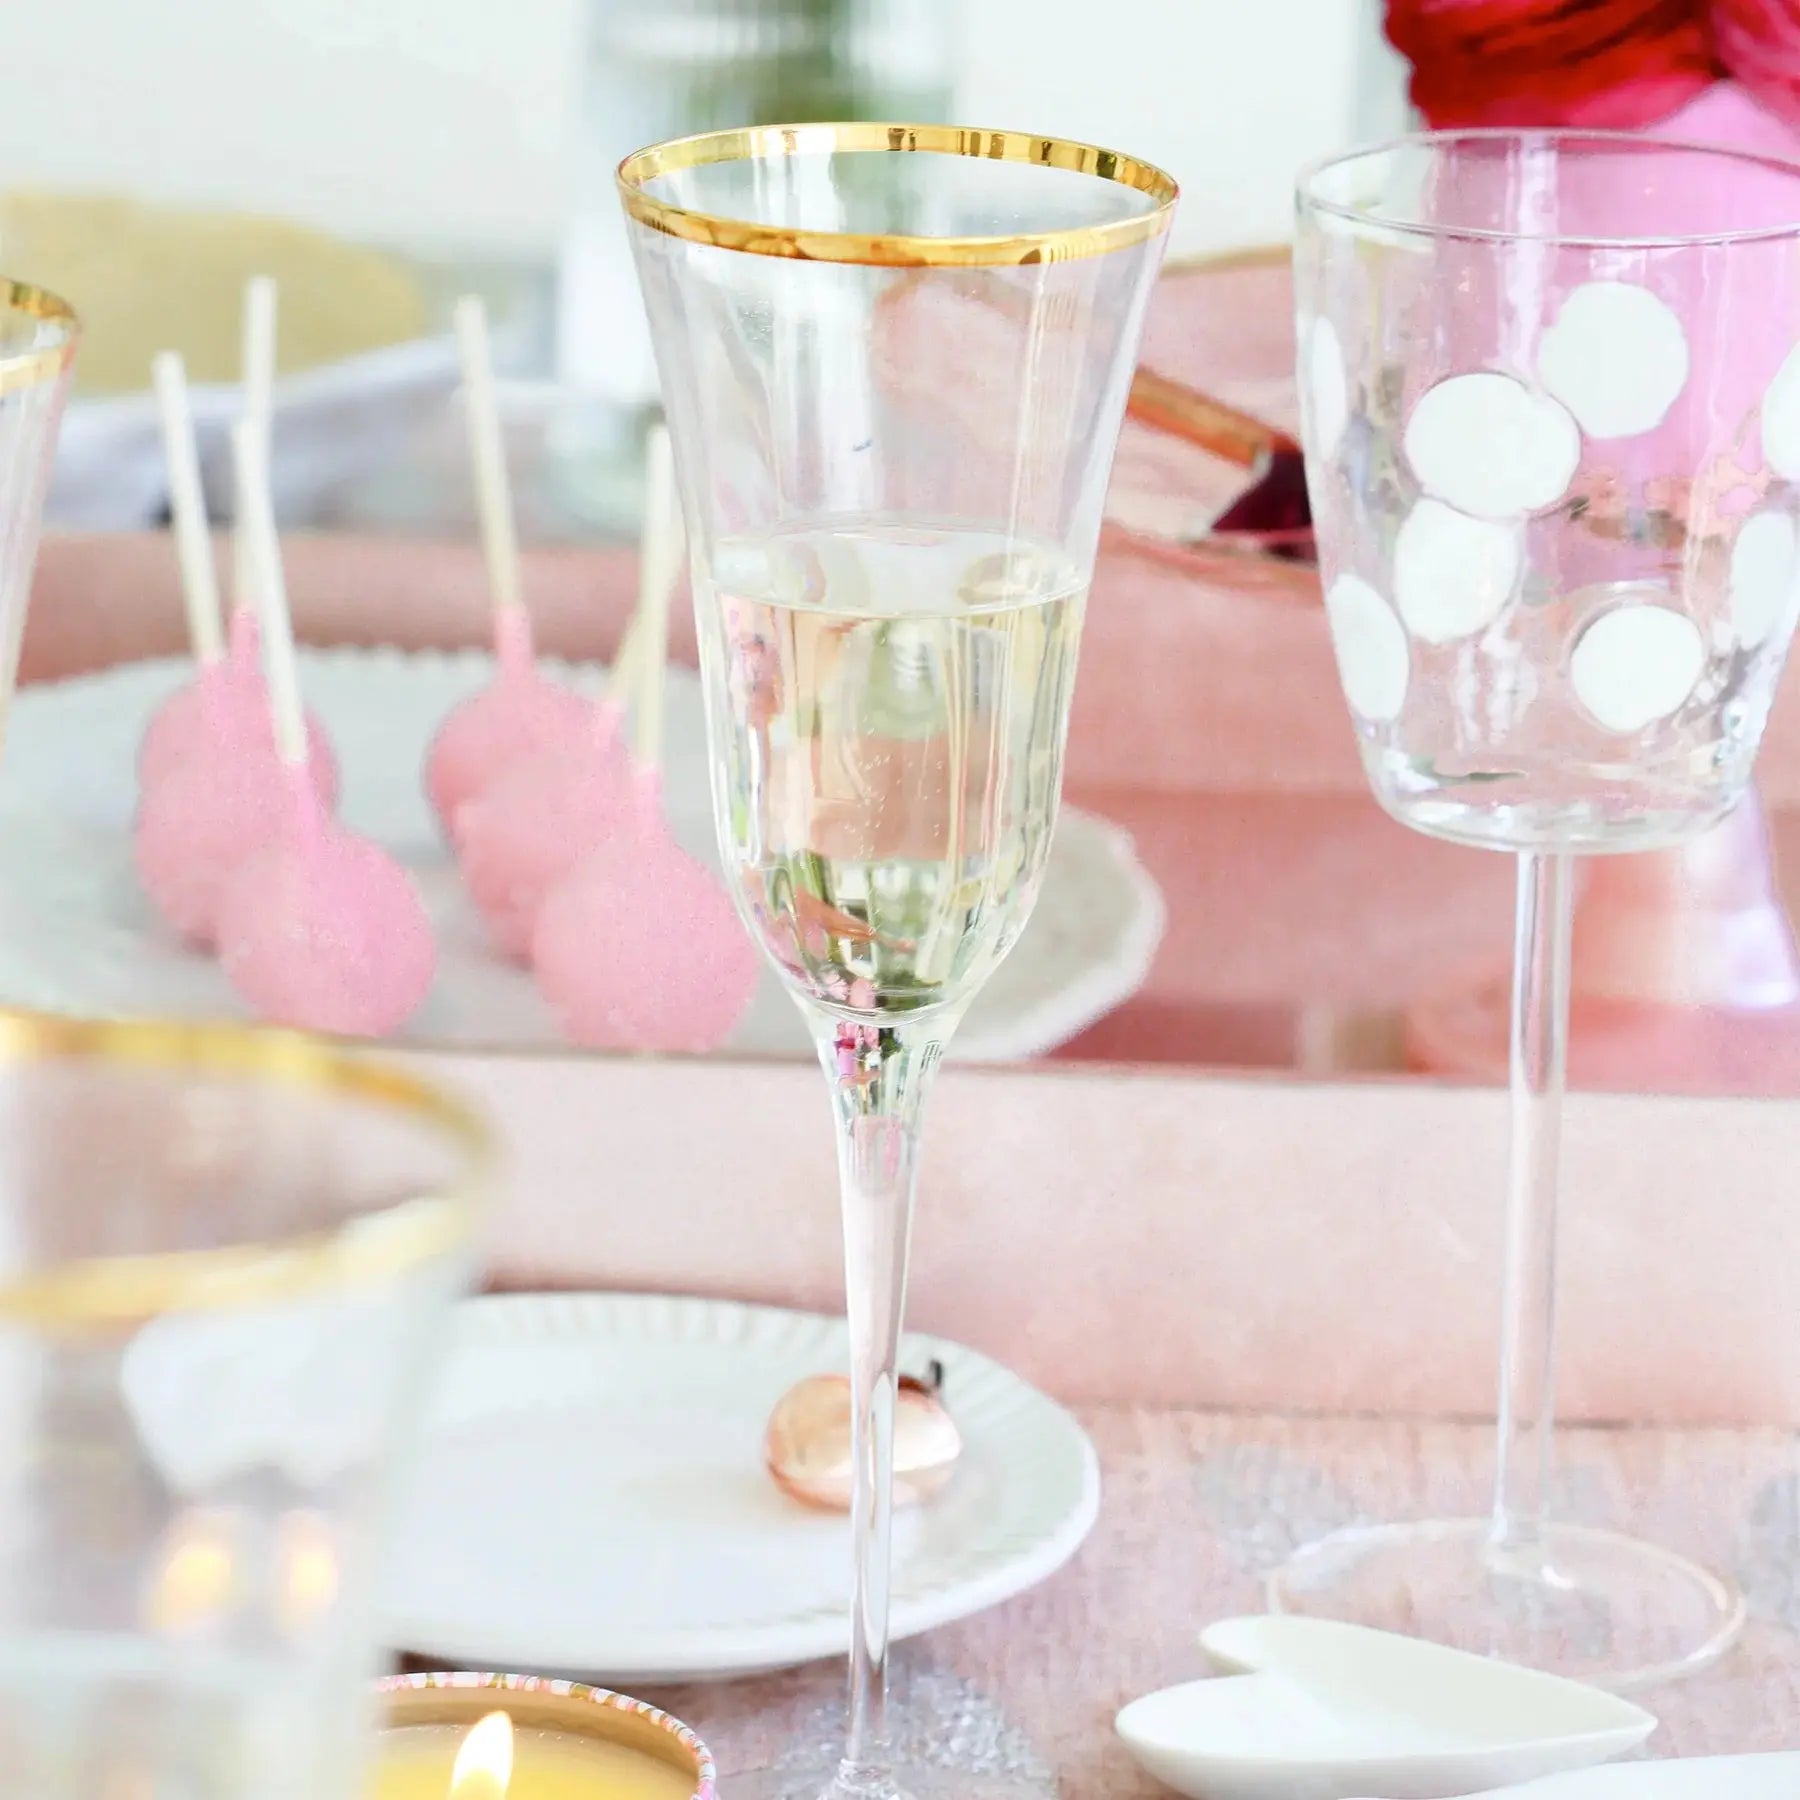 Filled Vietri Optical Champagne Glass on a table set next to cake pops and dessert plates